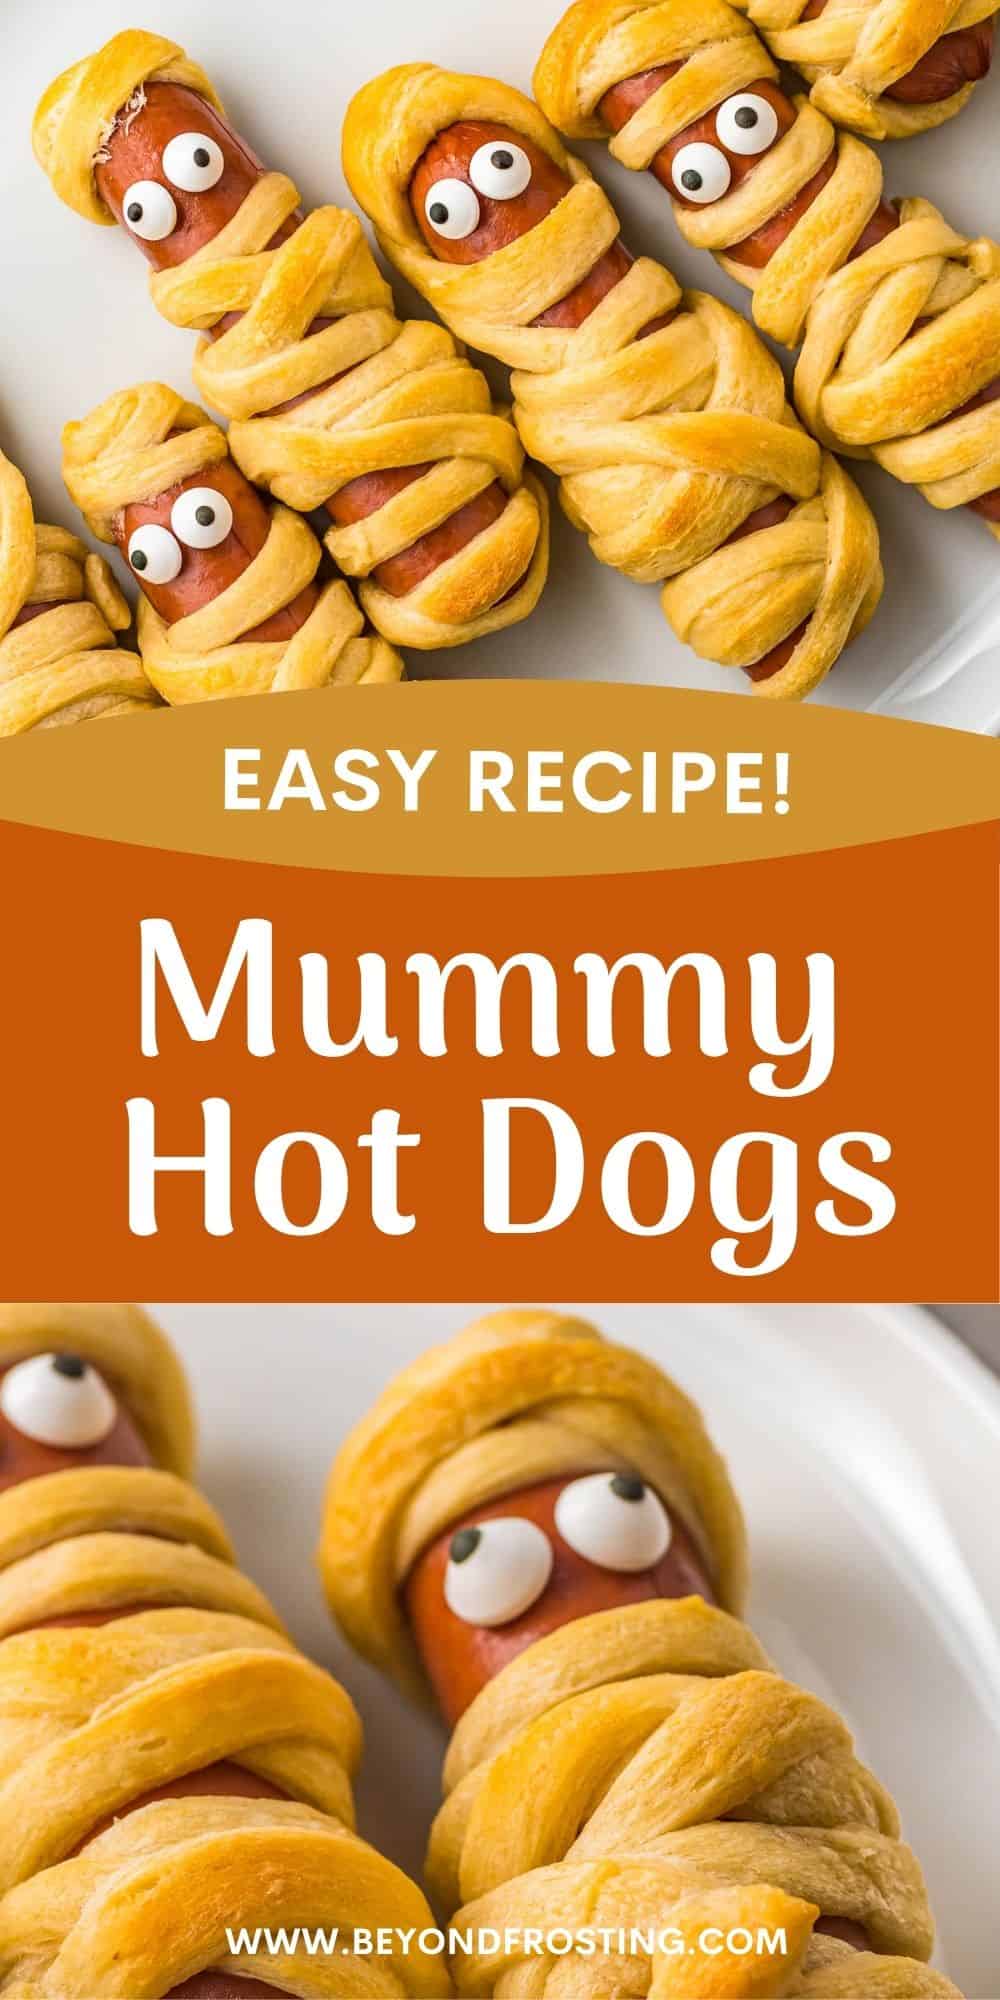 Easy Mummy Hot Dogs with 4 Halloween Dips | Beyond Frosting